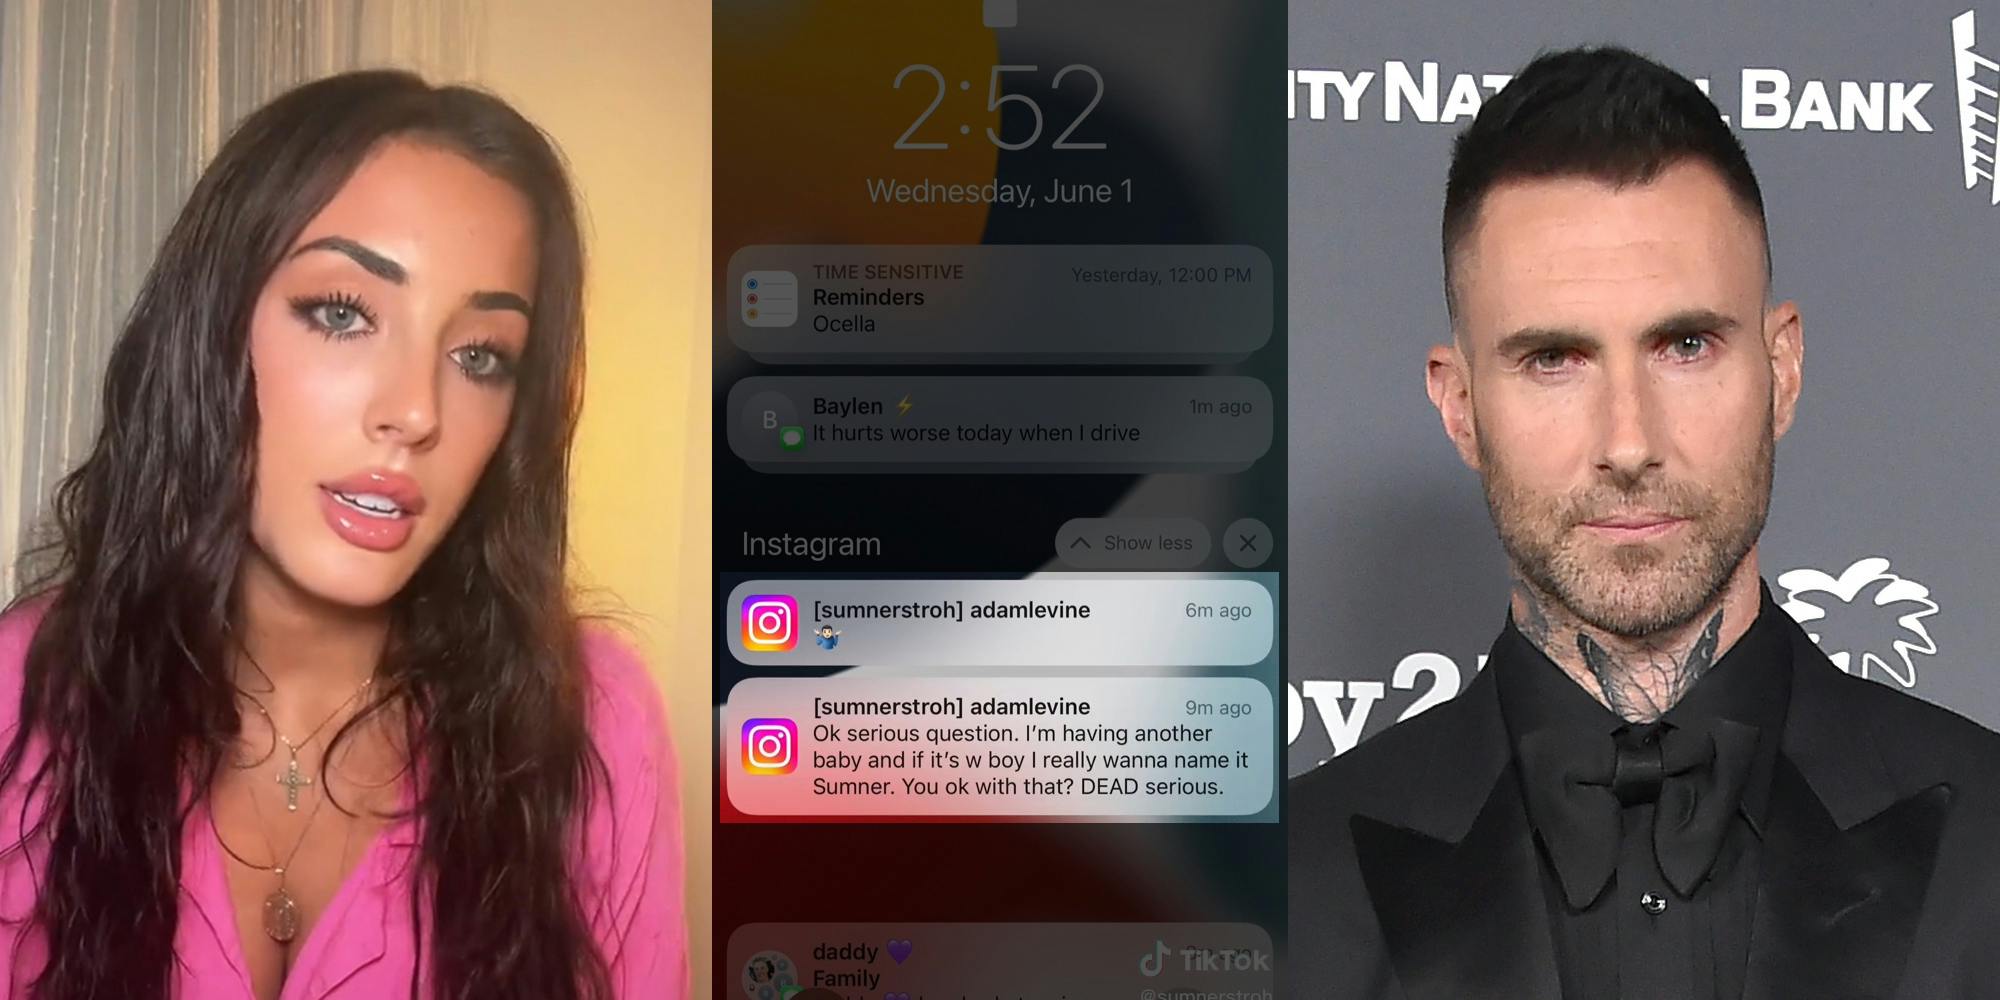 Sumner Stroh (l) Instagram notification from adamlevine that reads "Ok serious question. I'm having another baby and if it's w boy I really wanna name it Sumner. You ok with that? DEAD serious." (c) Adam Levine (r)